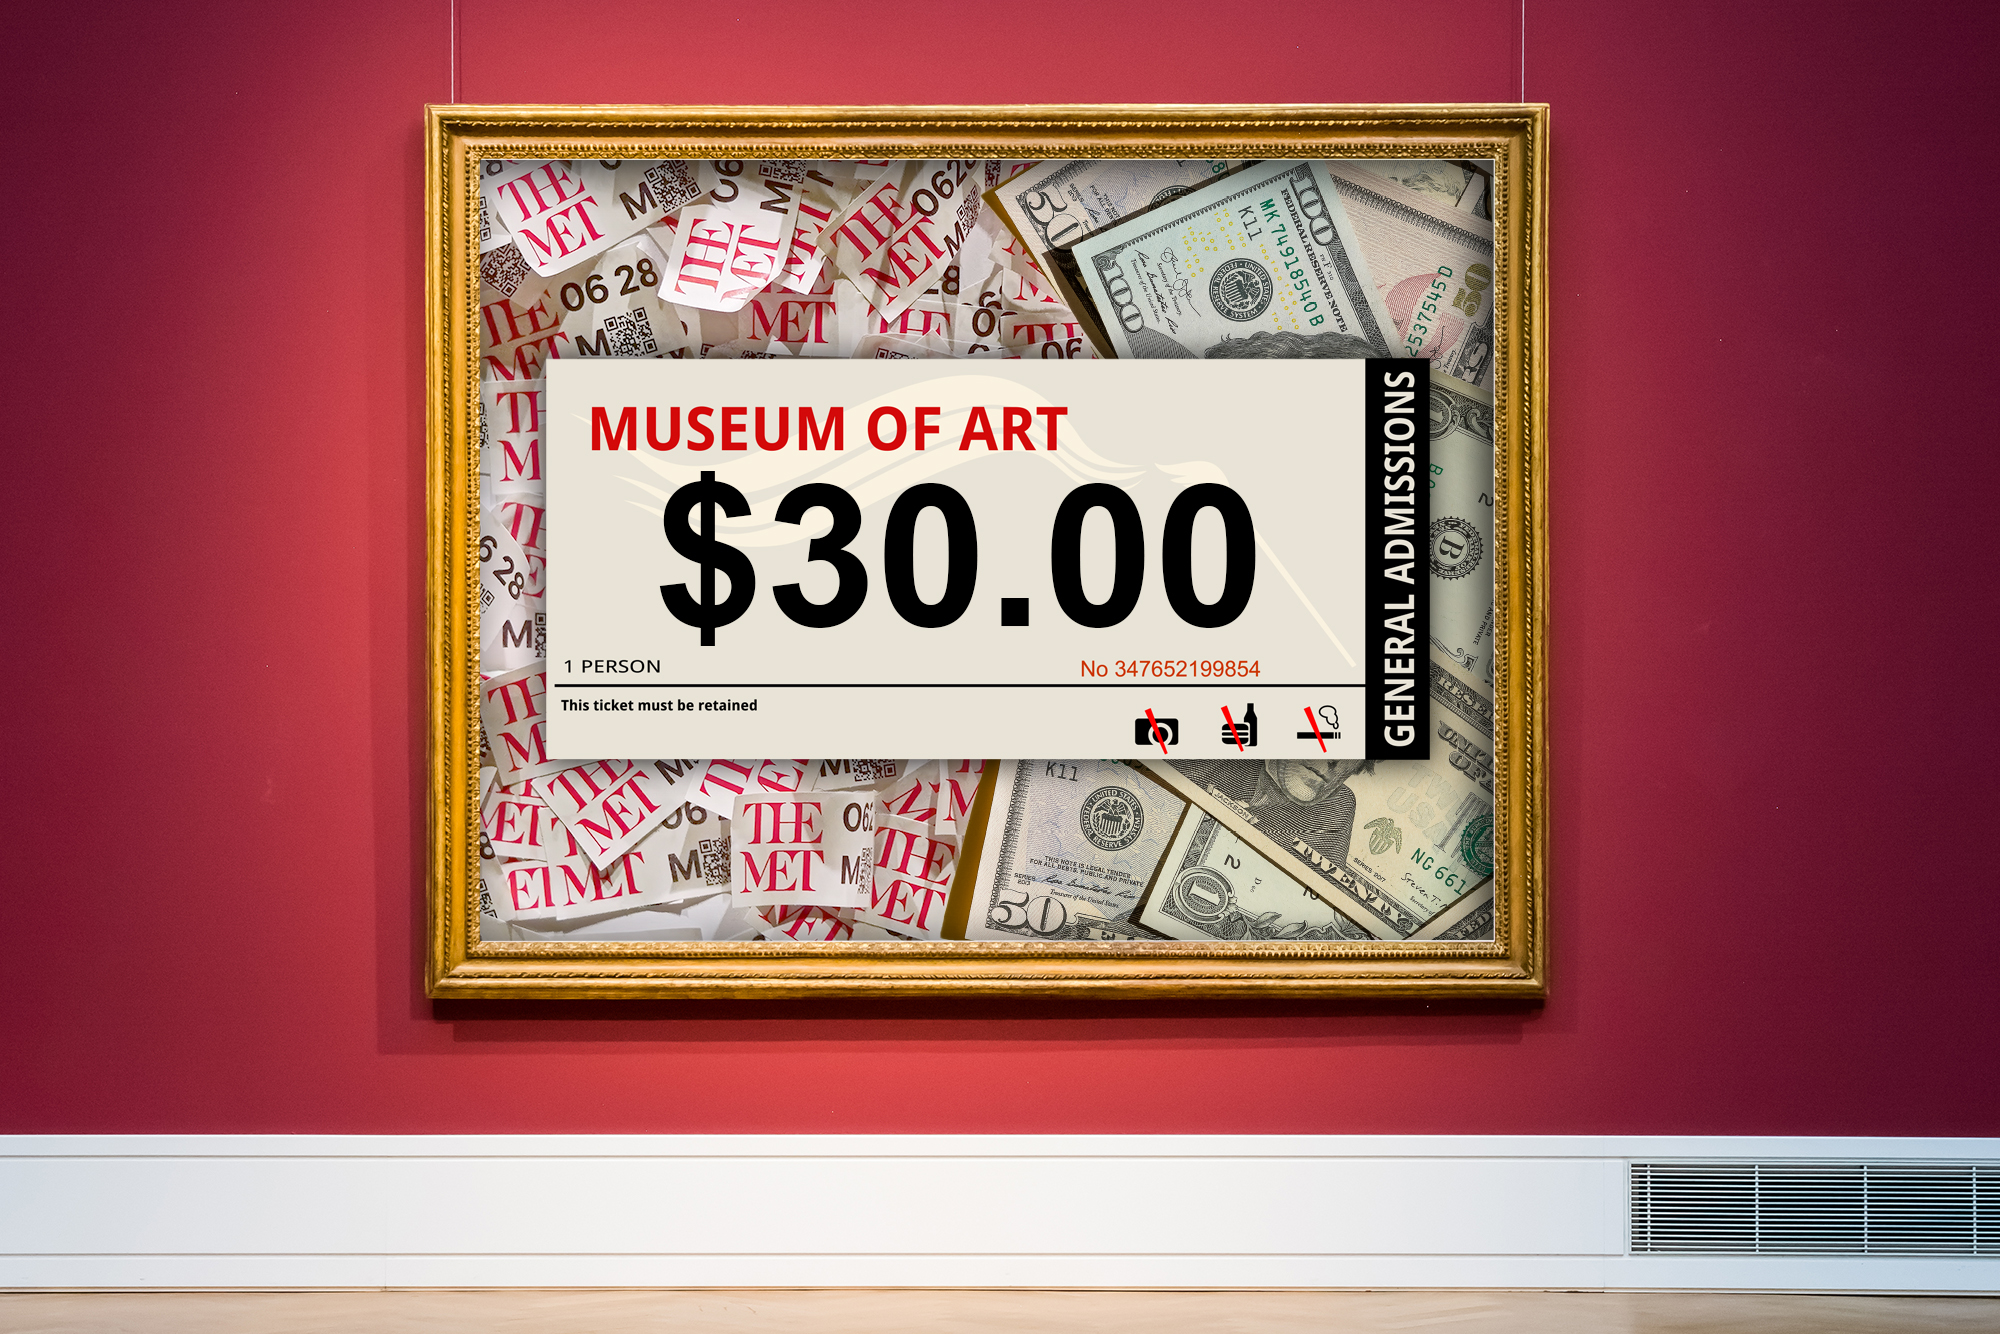 This is now the most expensive museum in New York City